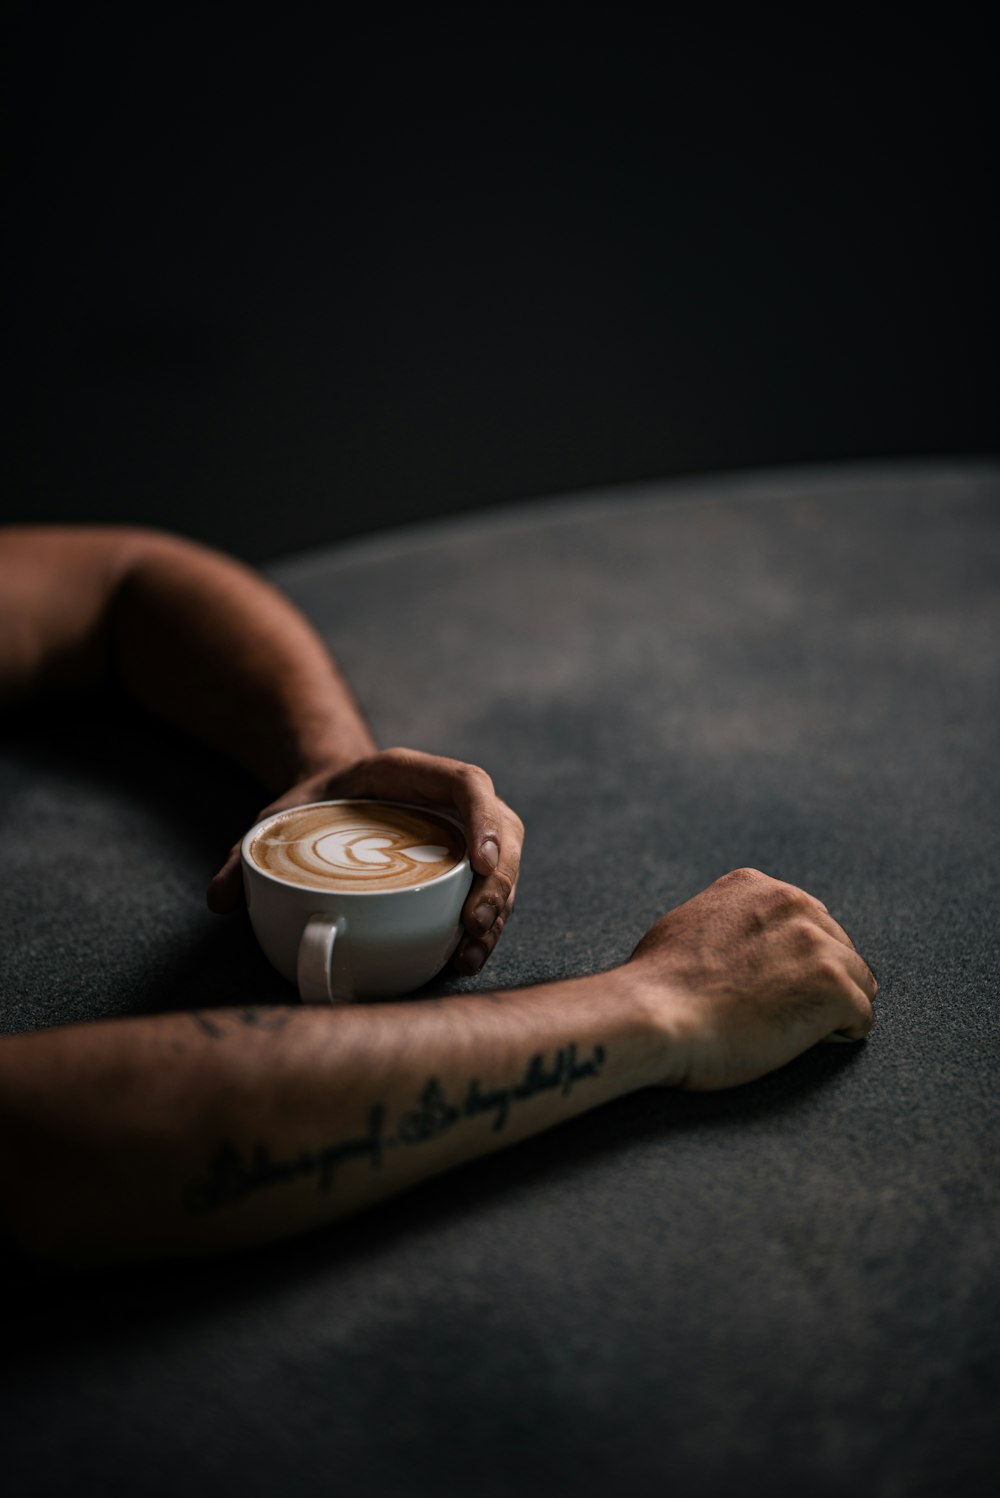 a close up of a hand holding a cup of coffee